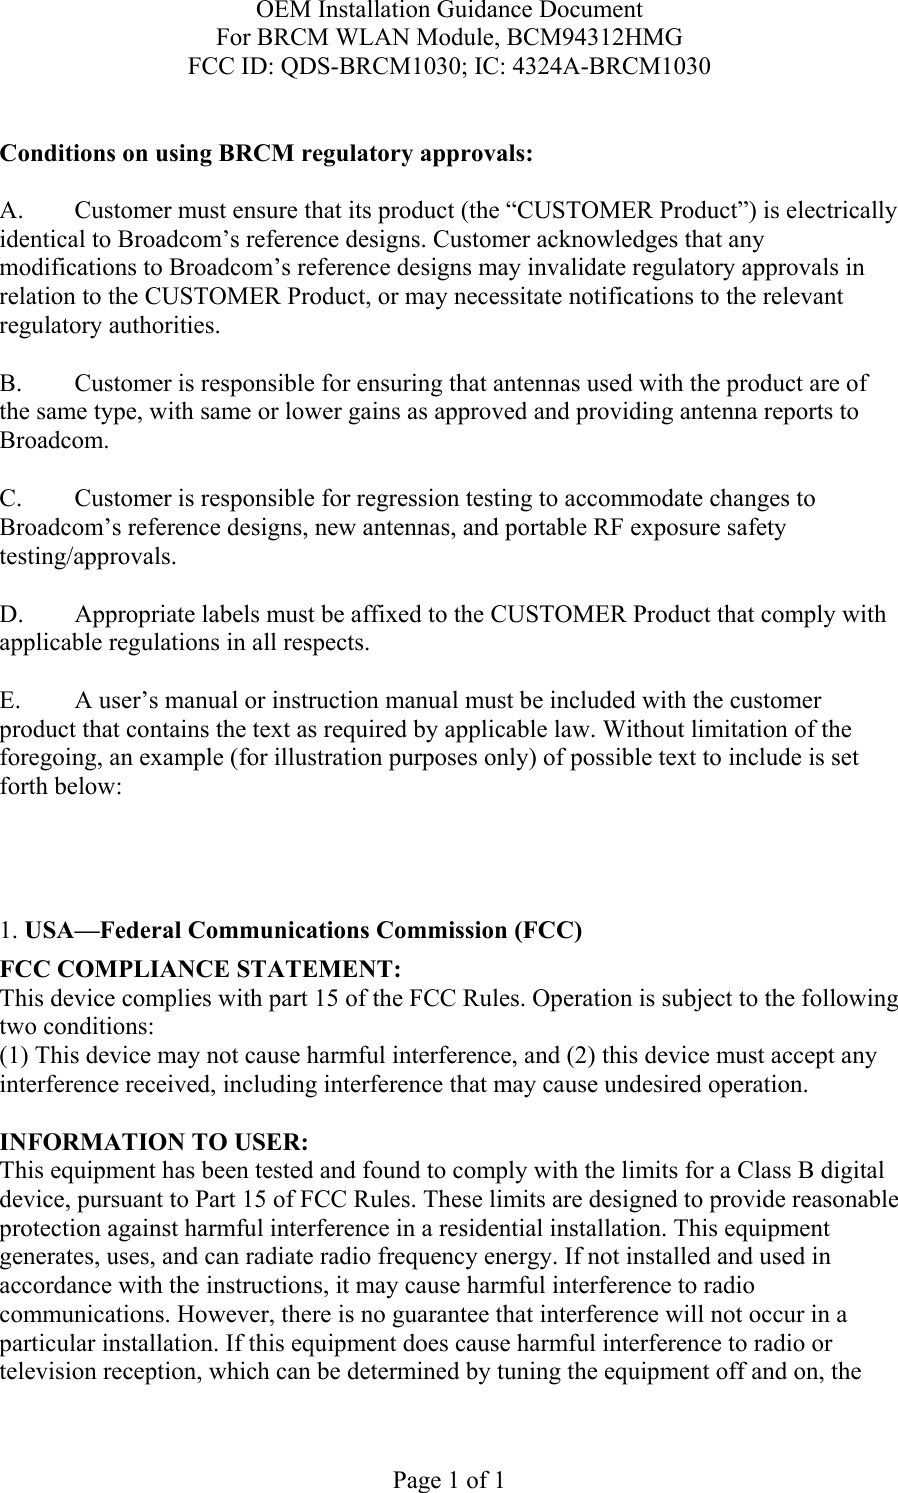 OEM Installation Guidance Document For BRCM WLAN Module, BCM94312HMG FCC ID: QDS-BRCM1030; IC: 4324A-BRCM1030  Page 1 of 1  Conditions on using BRCM regulatory approvals:   A.  Customer must ensure that its product (the “CUSTOMER Product”) is electrically identical to Broadcom’s reference designs. Customer acknowledges that any modifications to Broadcom’s reference designs may invalidate regulatory approvals in relation to the CUSTOMER Product, or may necessitate notifications to the relevant regulatory authorities.  B.   Customer is responsible for ensuring that antennas used with the product are of the same type, with same or lower gains as approved and providing antenna reports to Broadcom.  C.   Customer is responsible for regression testing to accommodate changes to Broadcom’s reference designs, new antennas, and portable RF exposure safety testing/approvals.  D.  Appropriate labels must be affixed to the CUSTOMER Product that comply with applicable regulations in all respects.    E.  A user’s manual or instruction manual must be included with the customer product that contains the text as required by applicable law. Without limitation of the foregoing, an example (for illustration purposes only) of possible text to include is set forth below:      1. USA—Federal Communications Commission (FCC) FCC COMPLIANCE STATEMENT: This device complies with part 15 of the FCC Rules. Operation is subject to the following two conditions: (1) This device may not cause harmful interference, and (2) this device must accept any interference received, including interference that may cause undesired operation.  INFORMATION TO USER: This equipment has been tested and found to comply with the limits for a Class B digital device, pursuant to Part 15 of FCC Rules. These limits are designed to provide reasonable protection against harmful interference in a residential installation. This equipment generates, uses, and can radiate radio frequency energy. If not installed and used in accordance with the instructions, it may cause harmful interference to radio communications. However, there is no guarantee that interference will not occur in a particular installation. If this equipment does cause harmful interference to radio or television reception, which can be determined by tuning the equipment off and on, the 